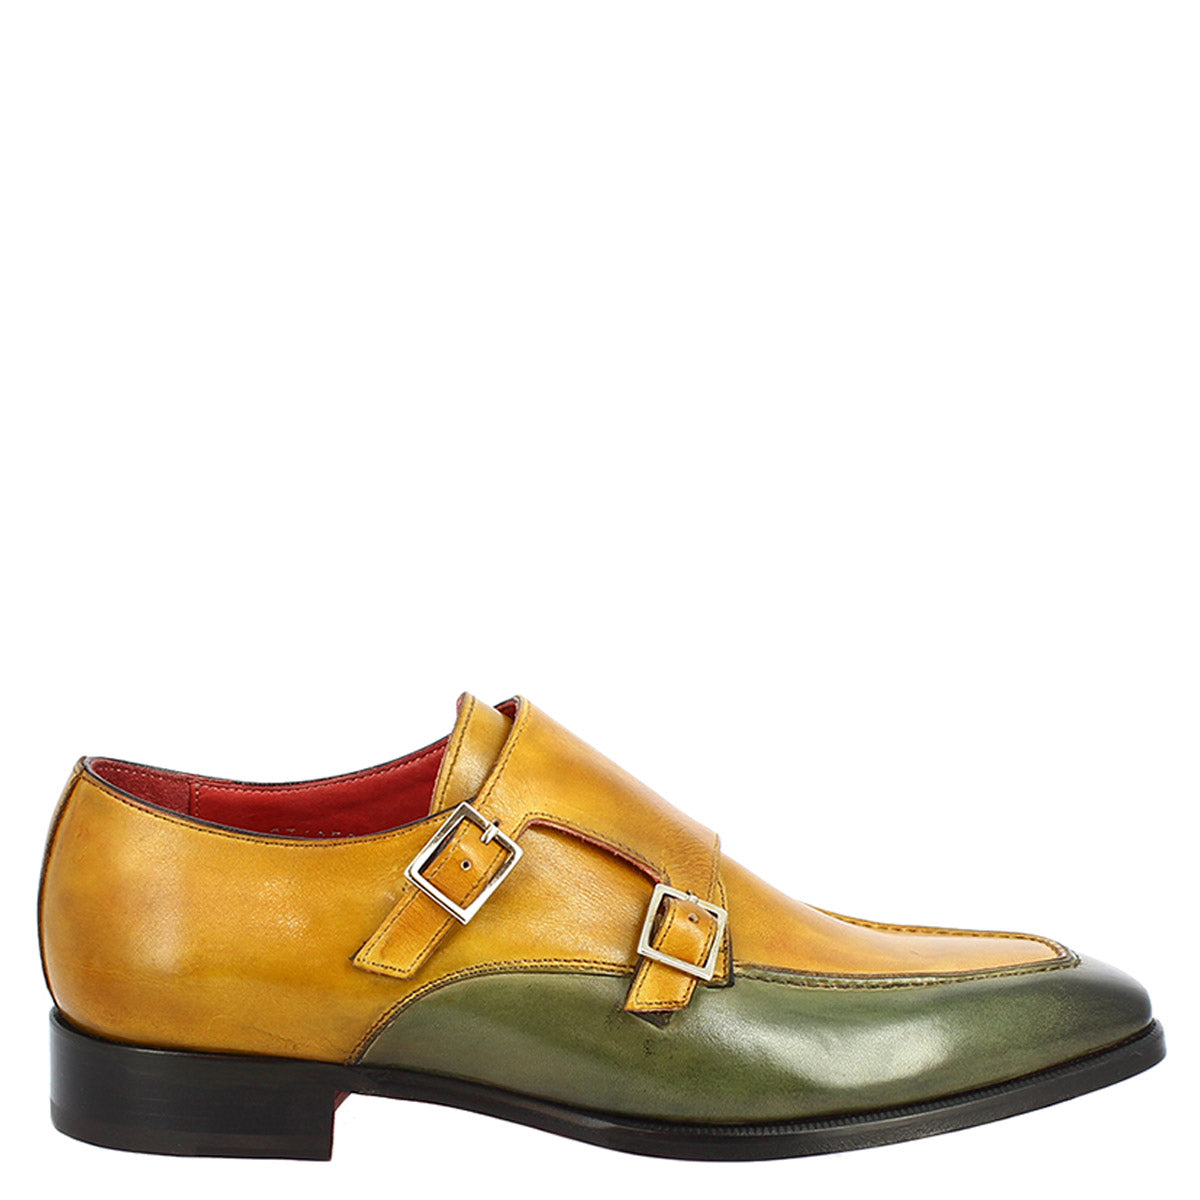 Handmade men's shoes with double buckle in faded green leather